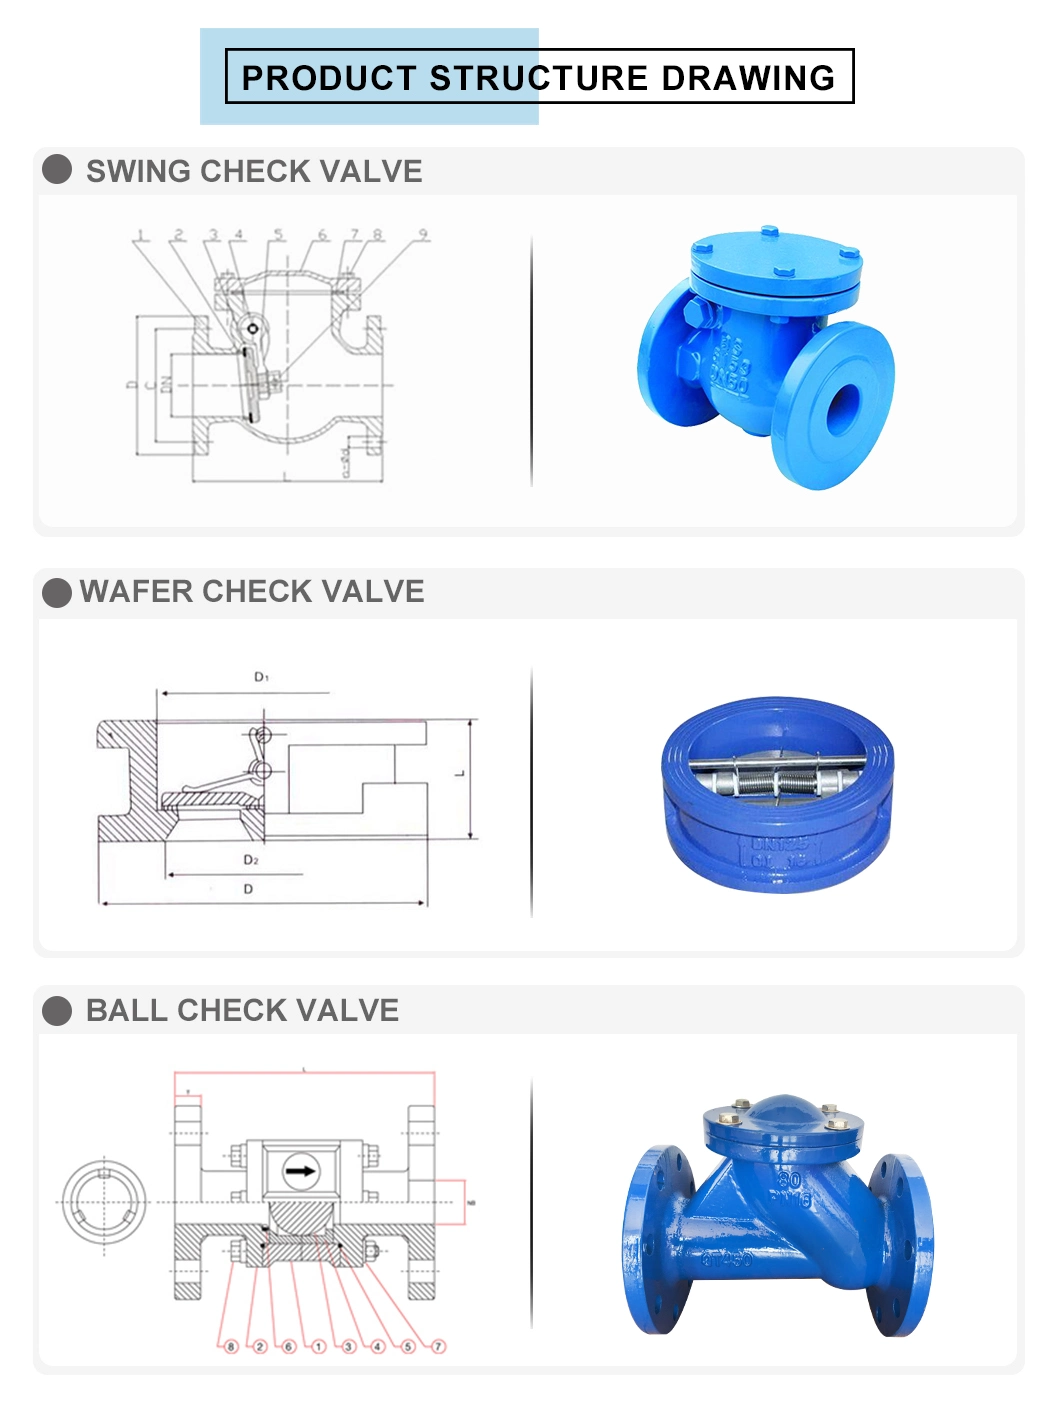 Low Price EPDM Seal Material 3 Inch Duckbill Rubber Metal Drain Flange Connection One Way Silence Check Valve